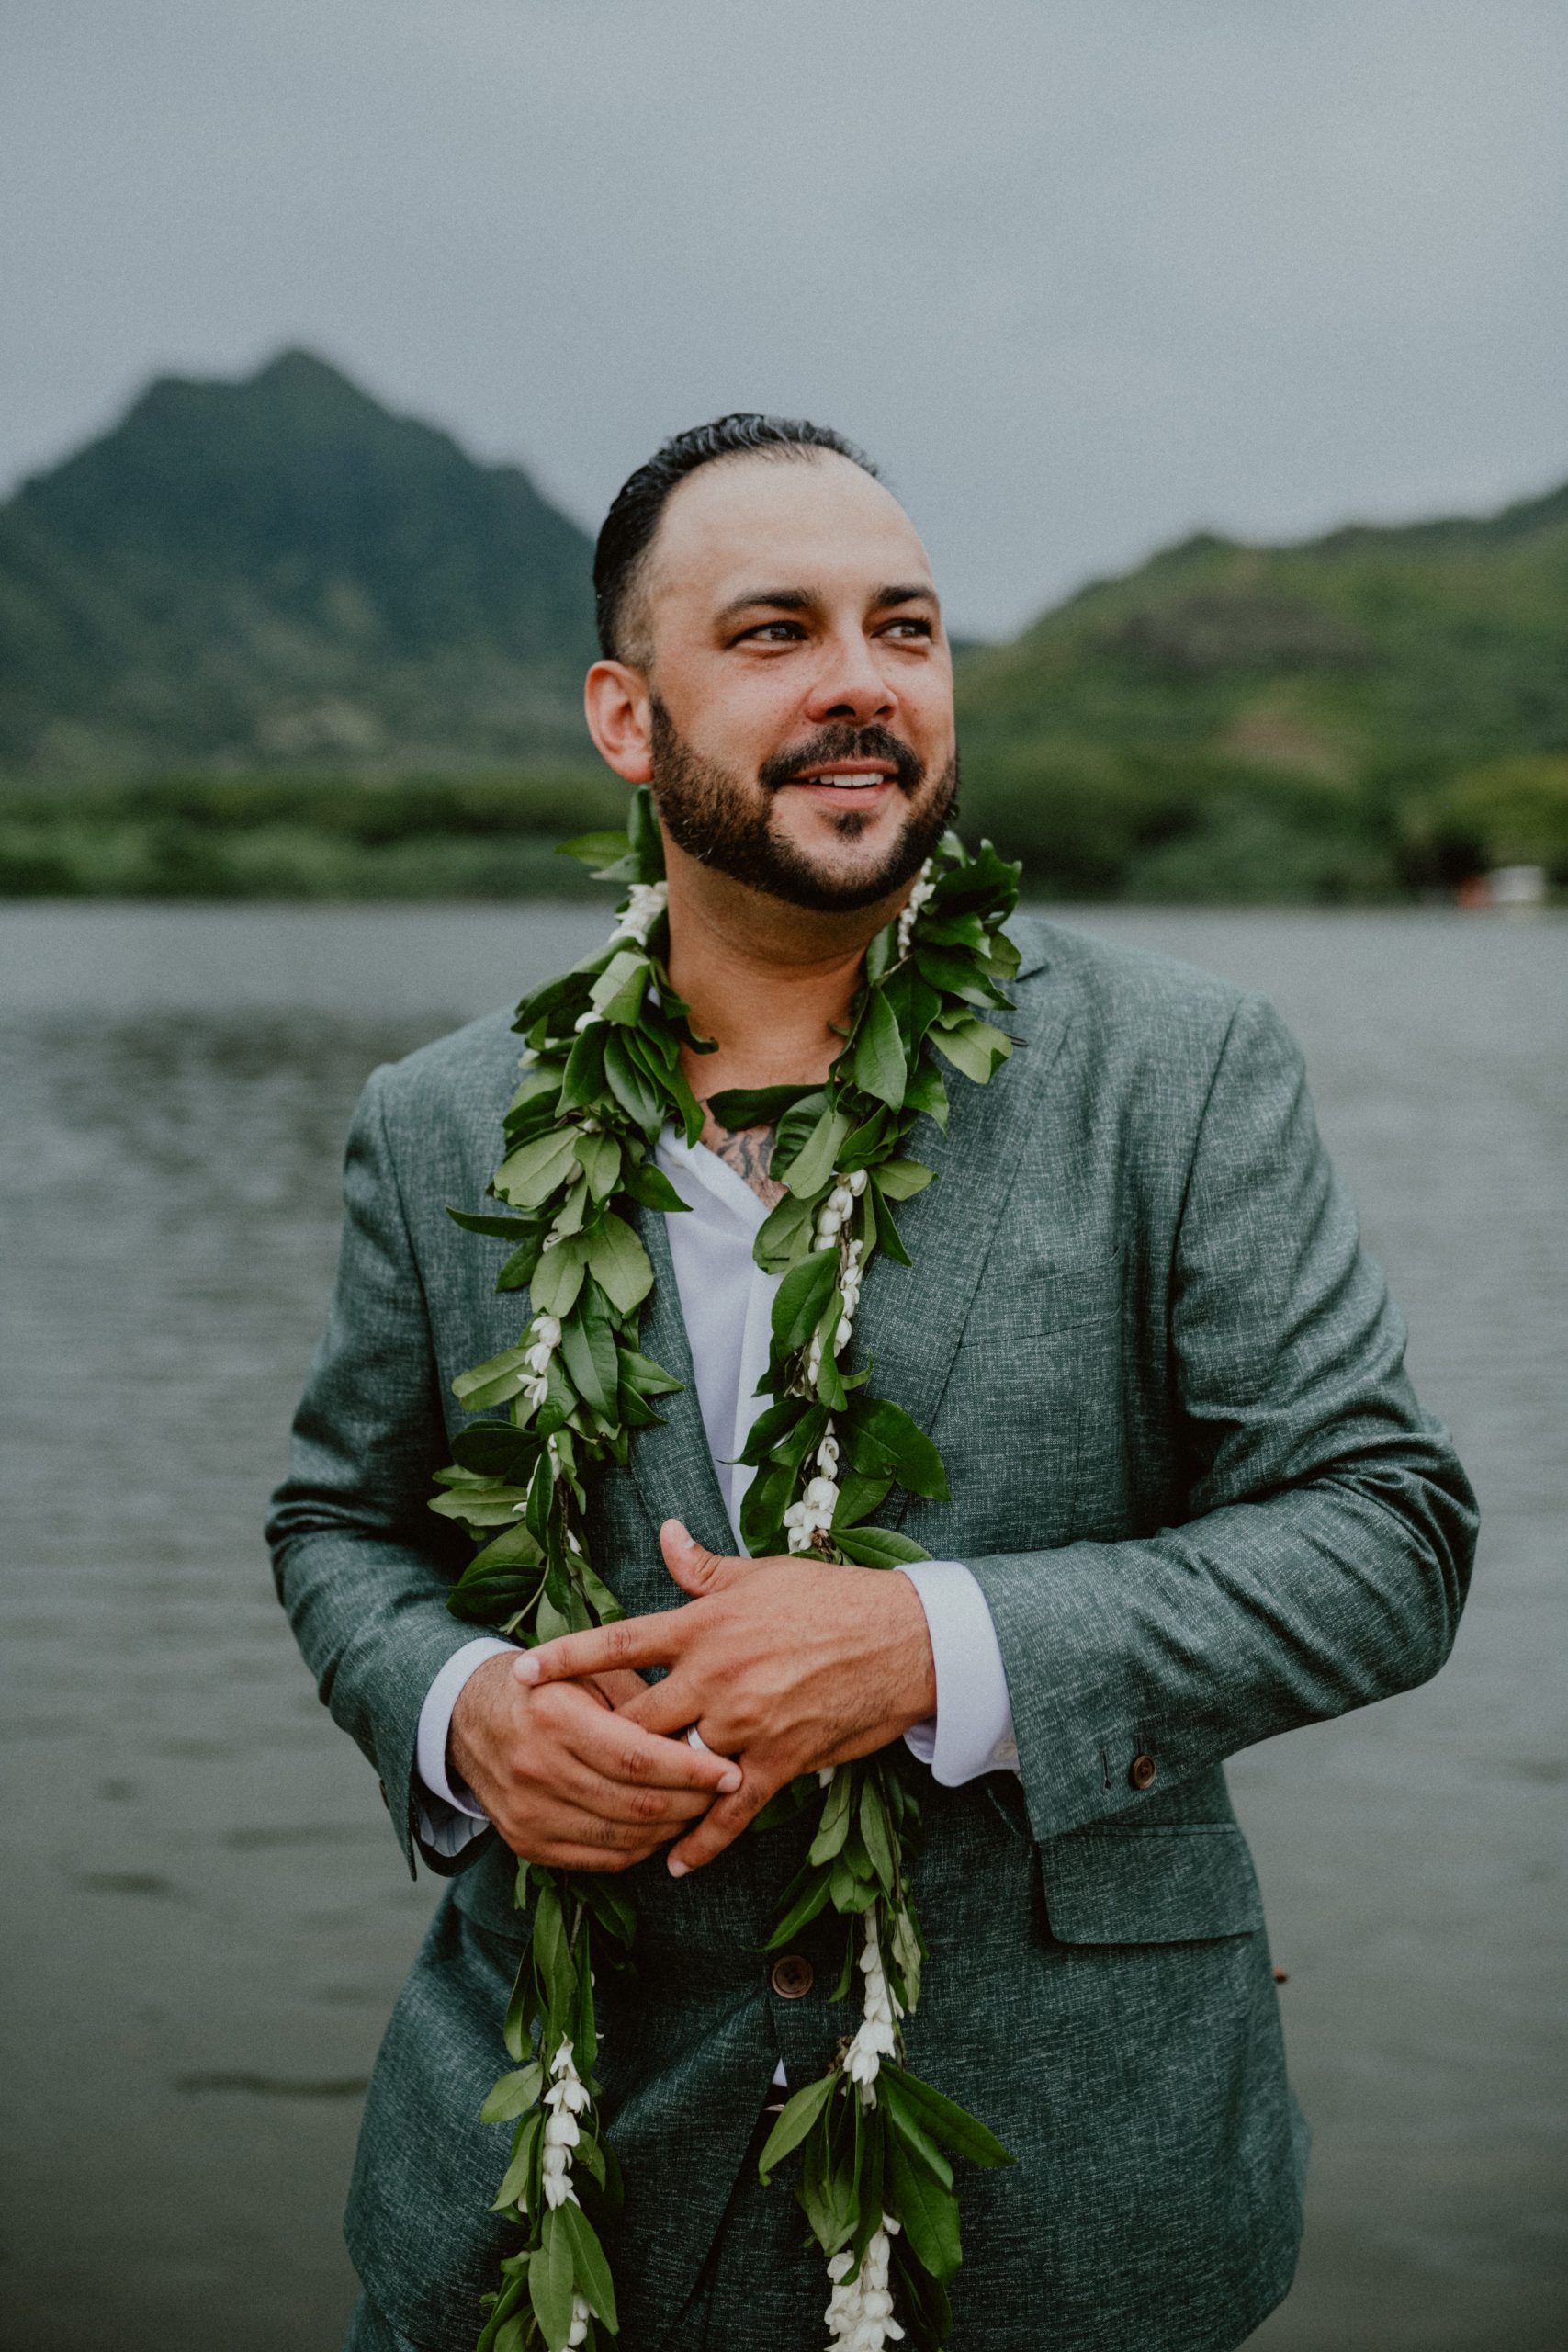 Groom stands in front of the water at the beach of Kualoa Ranch while wearing a traditional lei after the Oahu wedding ceremony | Oahu Wedding Photographer, Oahu Elopement Photographer, Destination Wedding Photographer, Destination Elopement Photographer, Newlywed moments ideas, Newlywed Photography inspiration, Hawaii Elopement ideas | chelseaabril.com